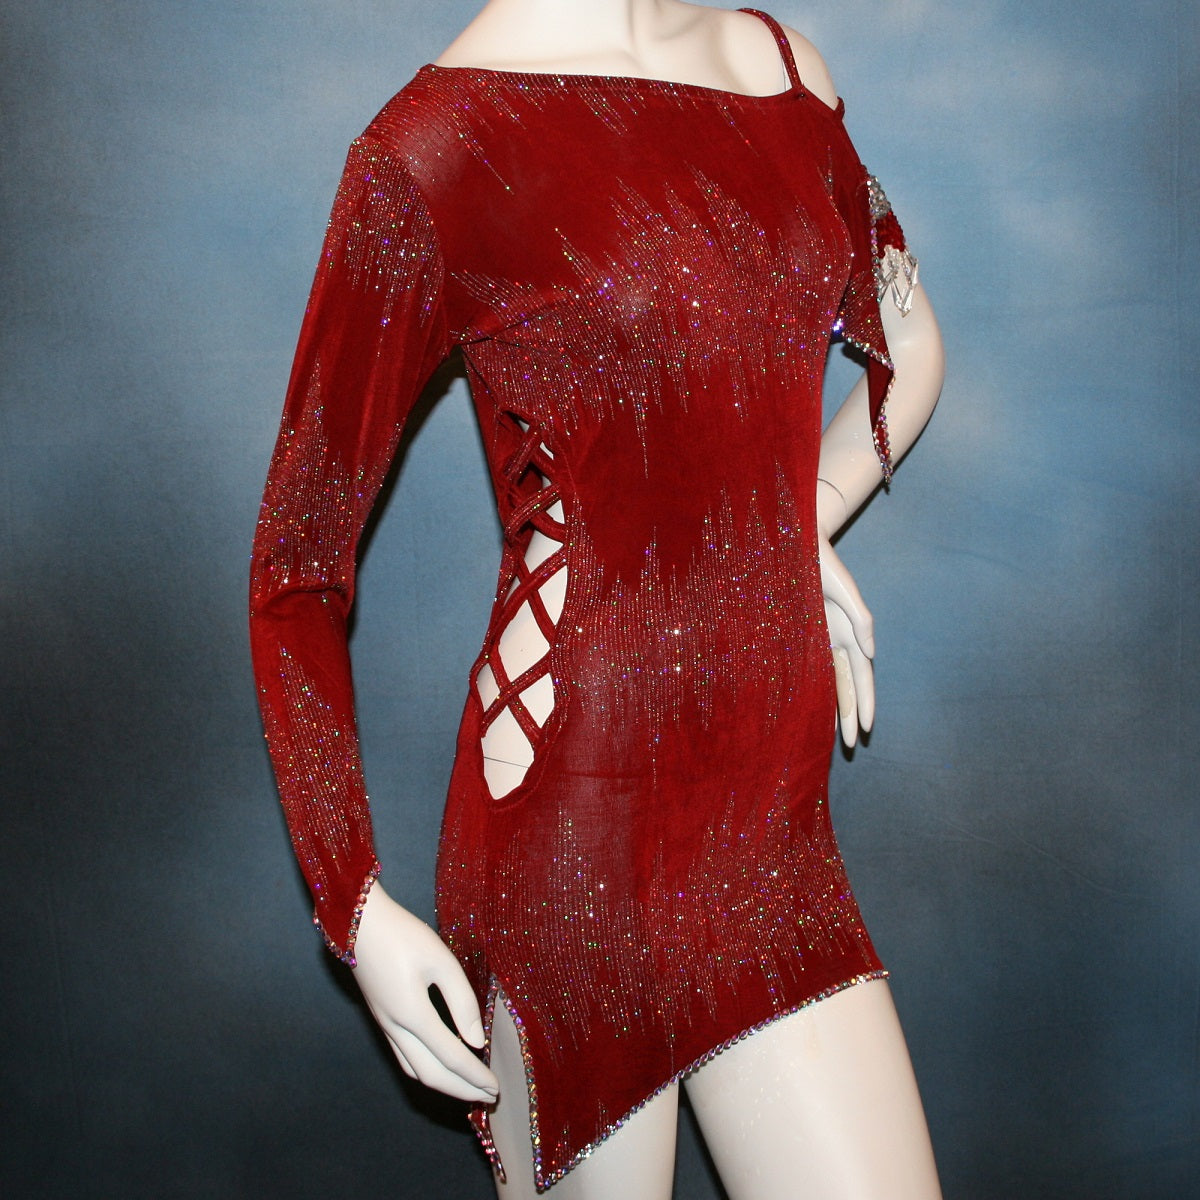 close right side view of Deep scarlette red Latin rhythm dress created in glitter slinky with an awesome electrifying glitter pattern features lattice detailing in the sides, one long sleeve & interesting detailing on the opposite shoulder with Swarovski hand beading & Crystal Ab rhinestone work edging the skirting, split cape sleeve & long sleeve.